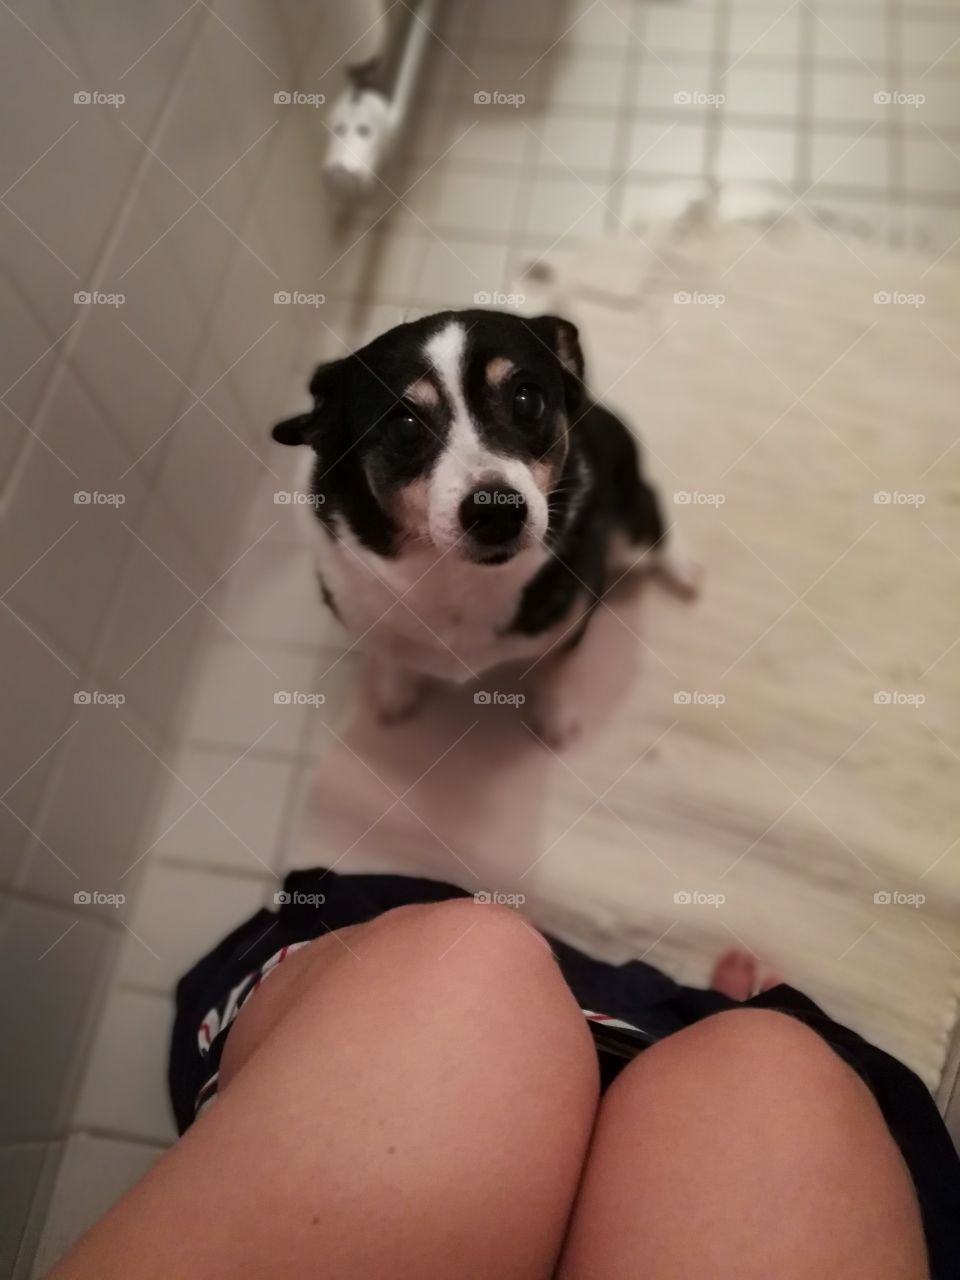 Cute dog looking at me on the toilet